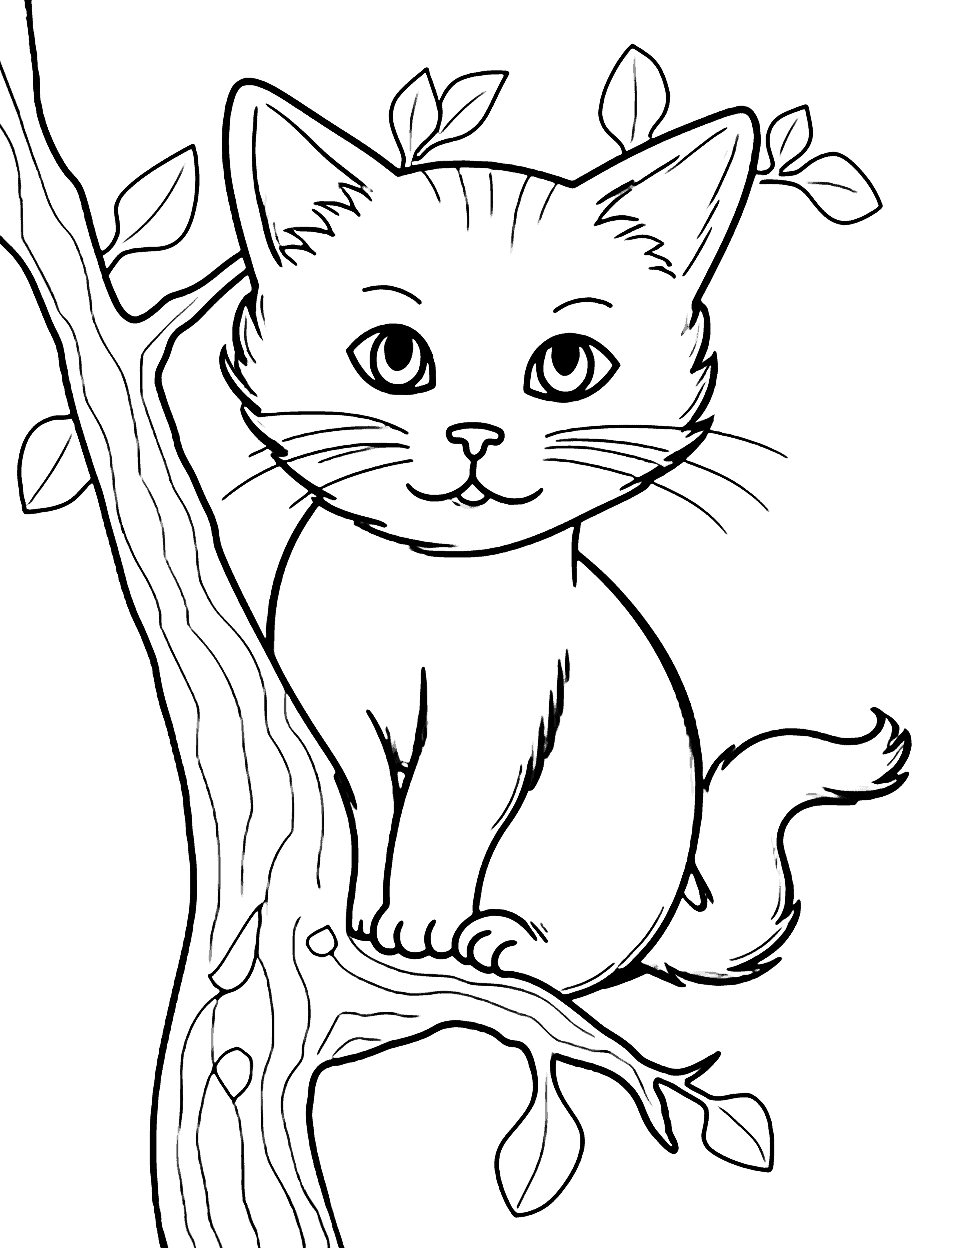 Easy Coloring Sheet of a Cat on Tree Page - A simple image of a cat climbing a tree, easy for young kids to color.